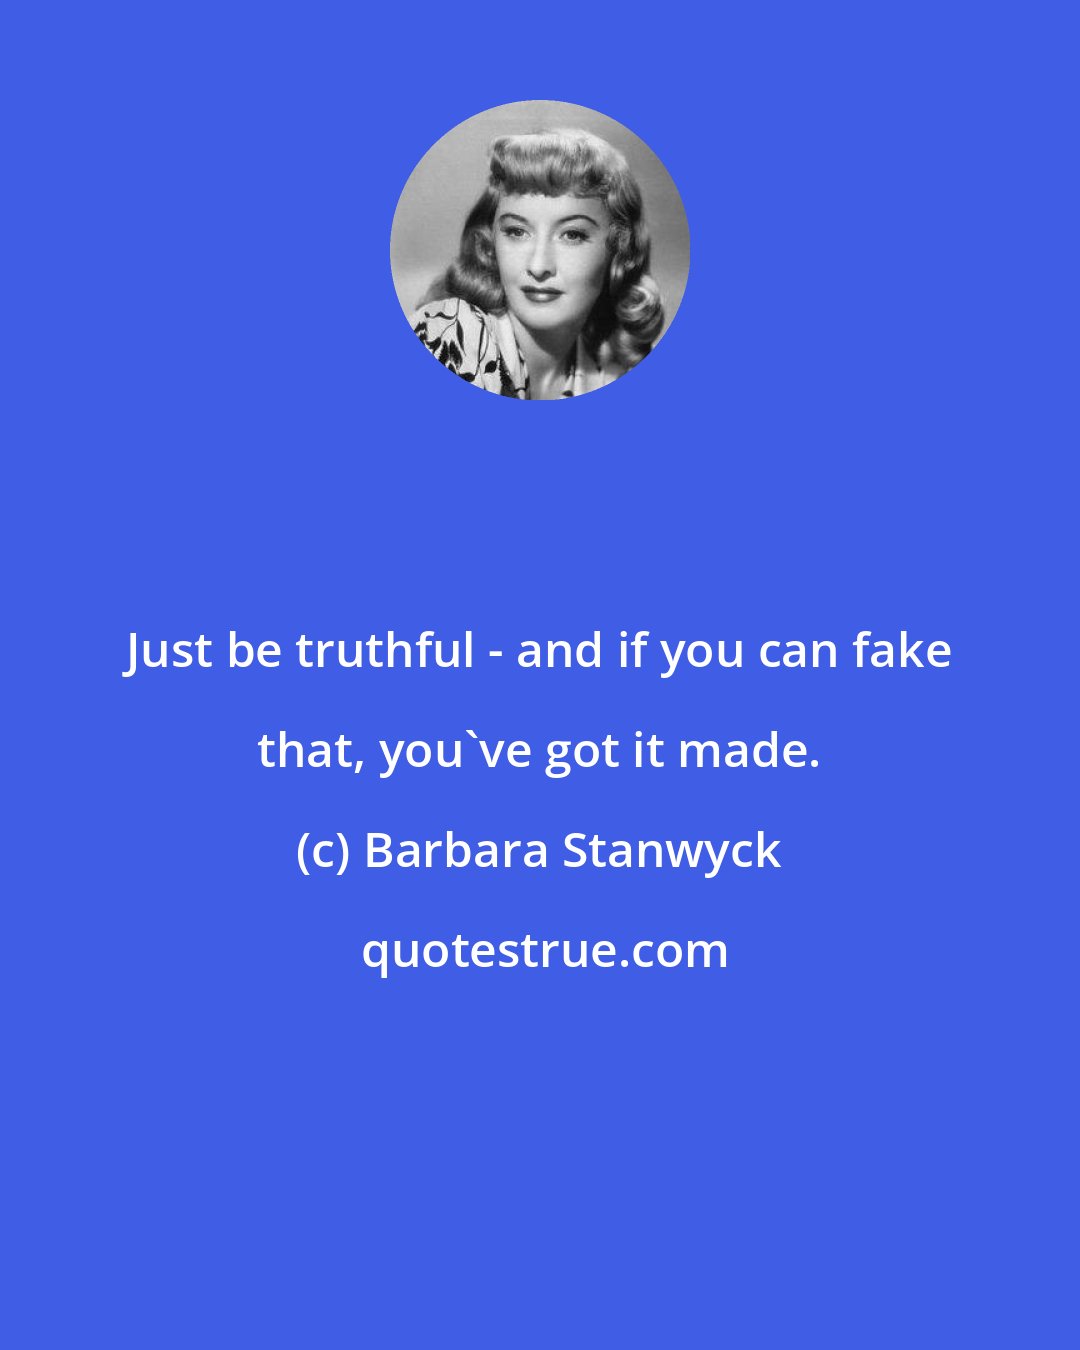 Barbara Stanwyck: Just be truthful - and if you can fake that, you've got it made.